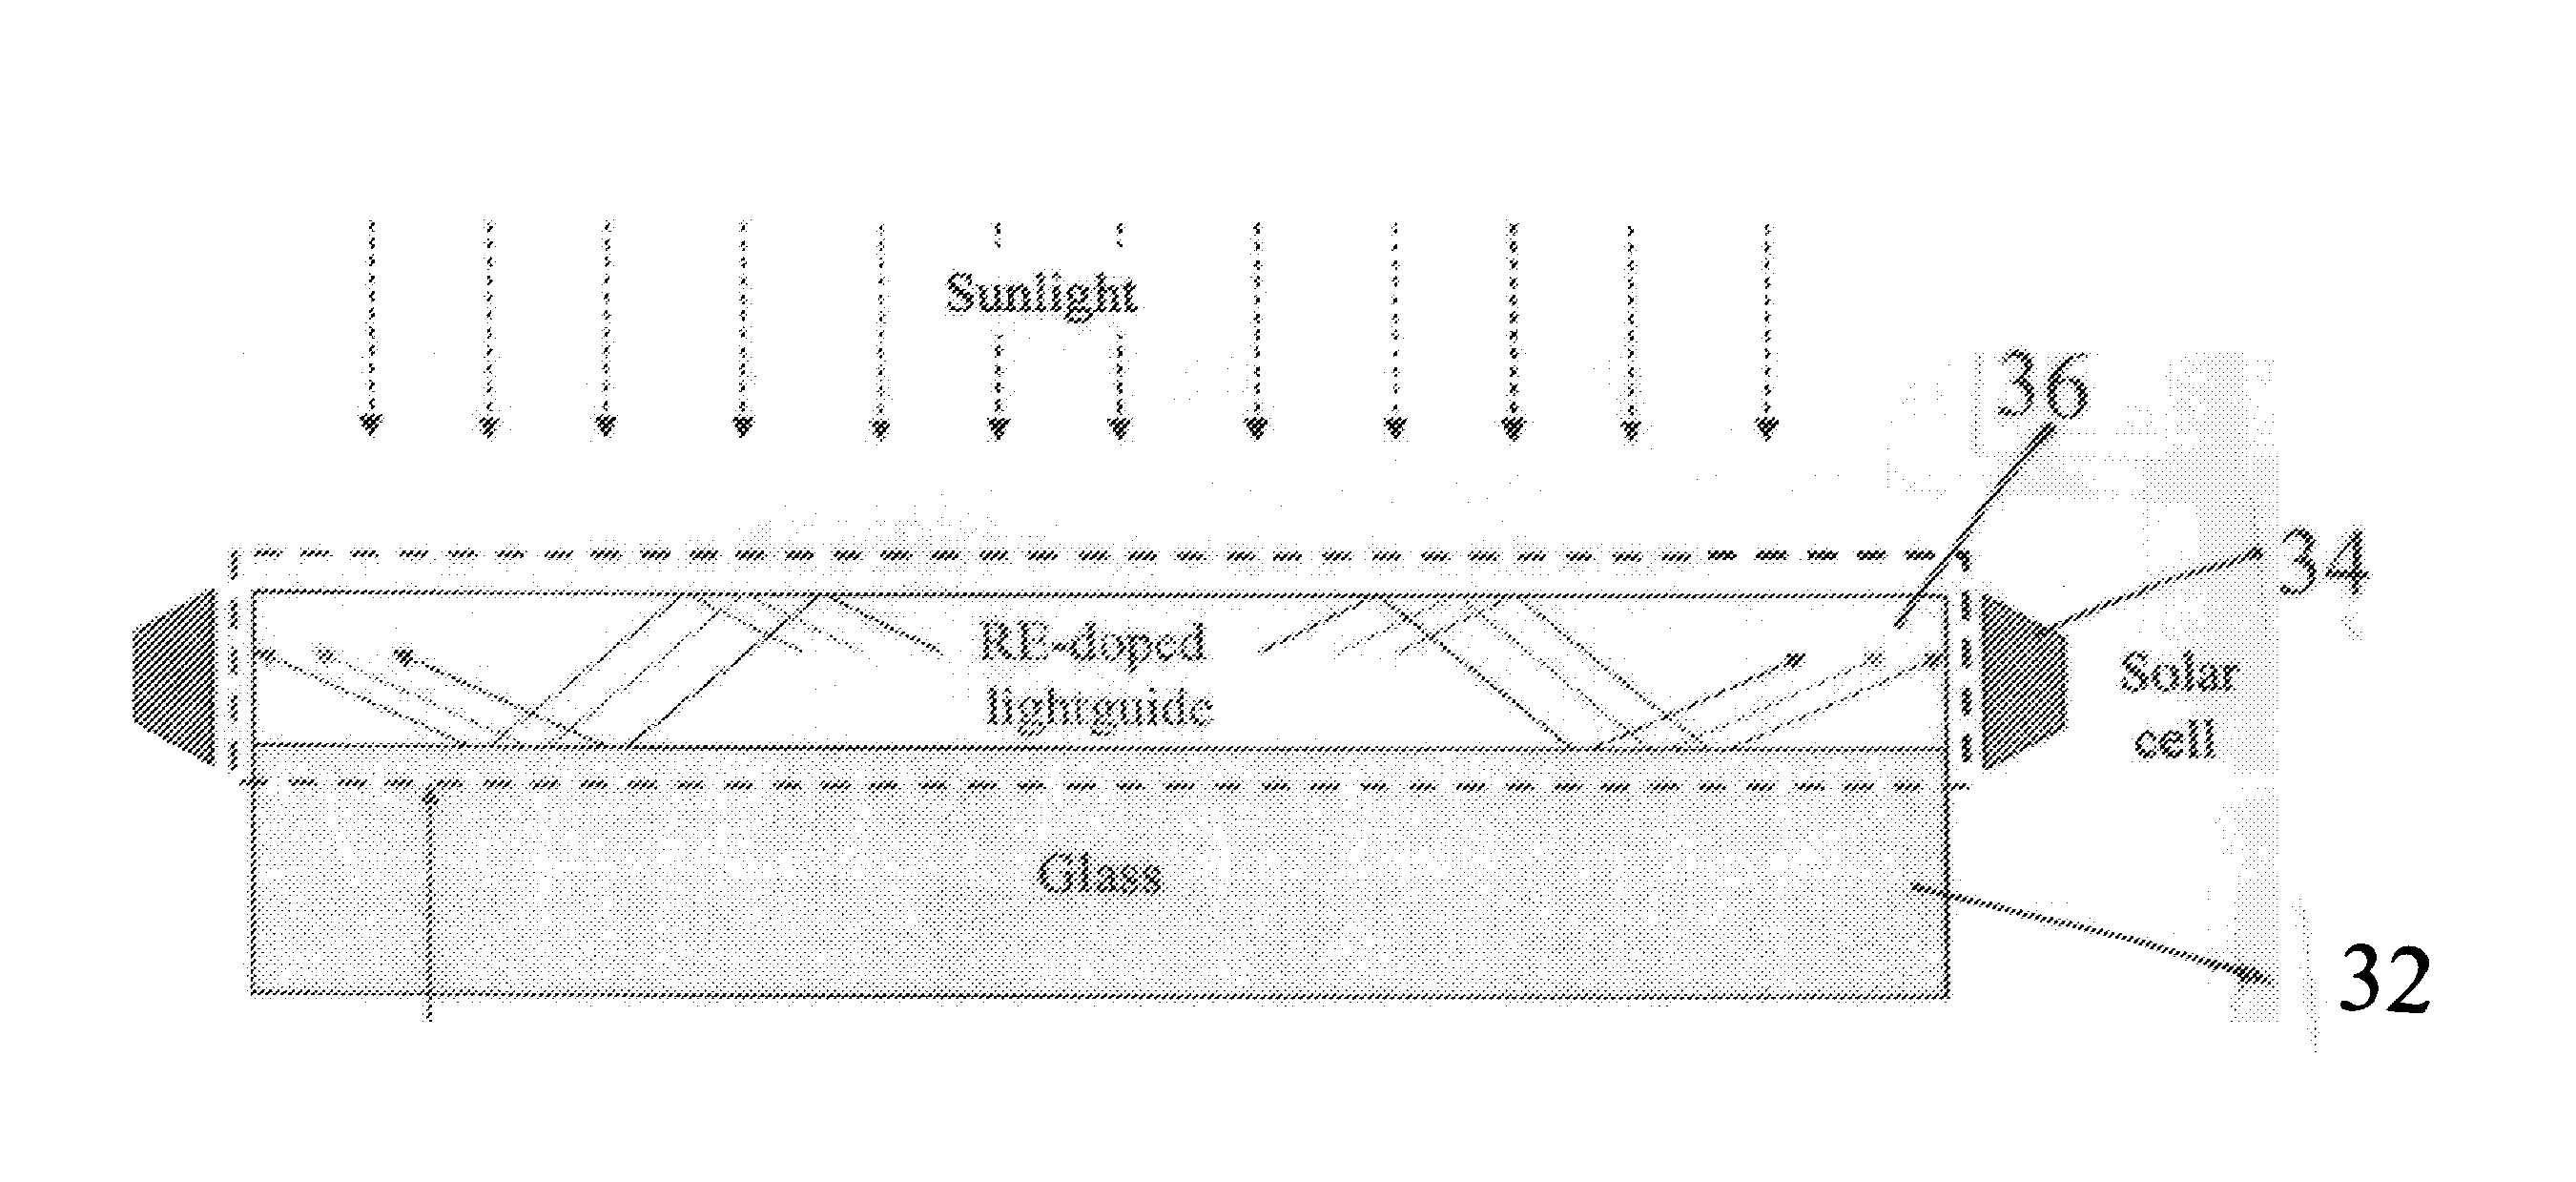 Organic-Inorganic Complexes Containing a Luminescent Rare earth-Metal Nanocluster and an Antenna Ligand, Luminescent Articles, and Methods of Making Luminescent Compositions